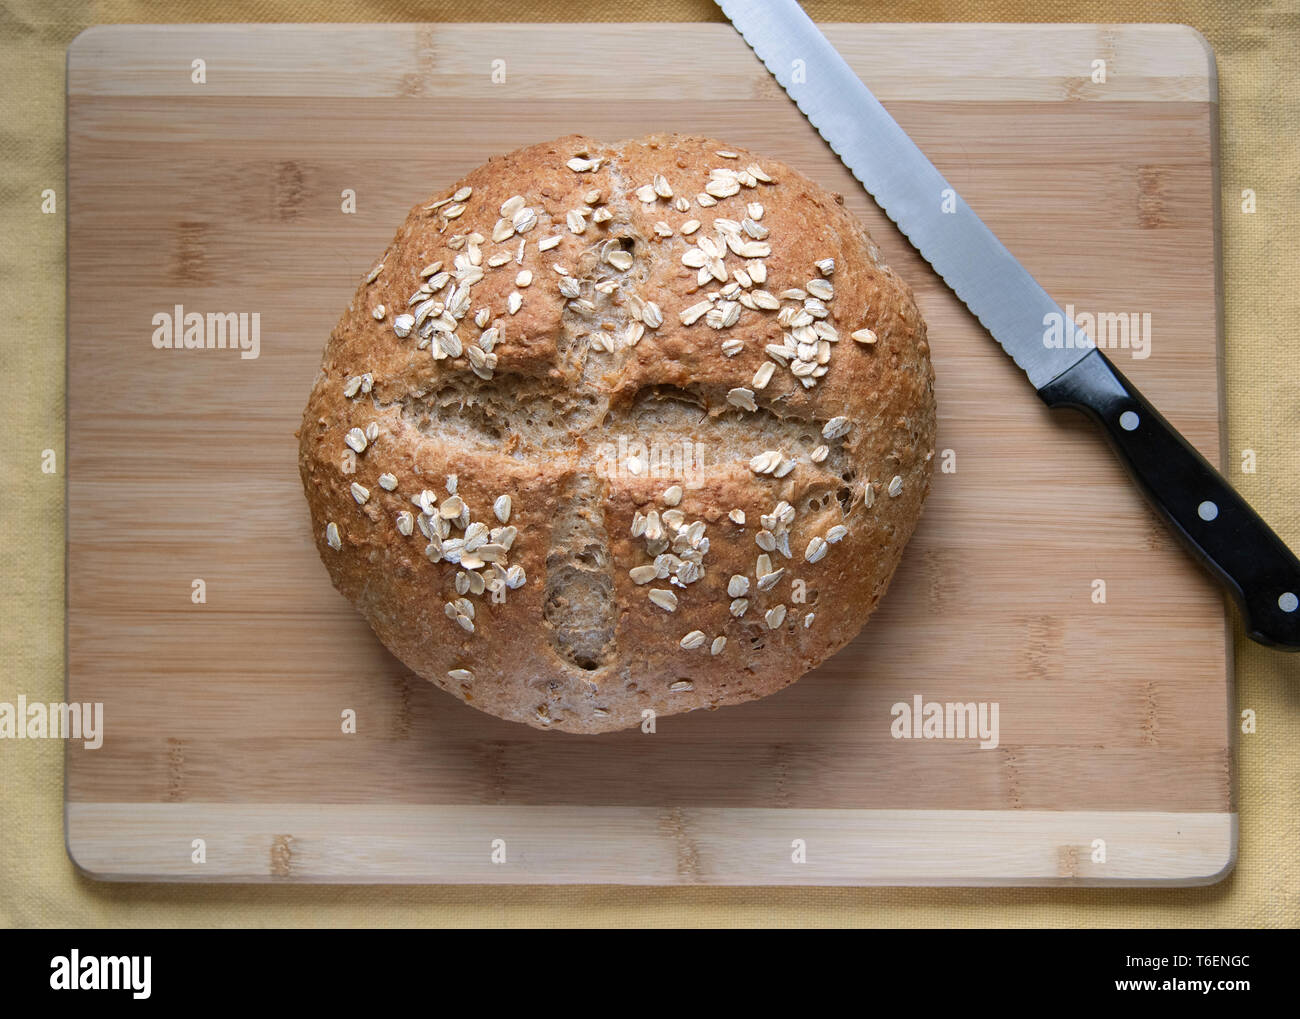 A round loaf of artisan whole-grain bread with scored crust, garnished with rolled oats, overhead shot, resting on a bamboo cutting board. Stock Photo